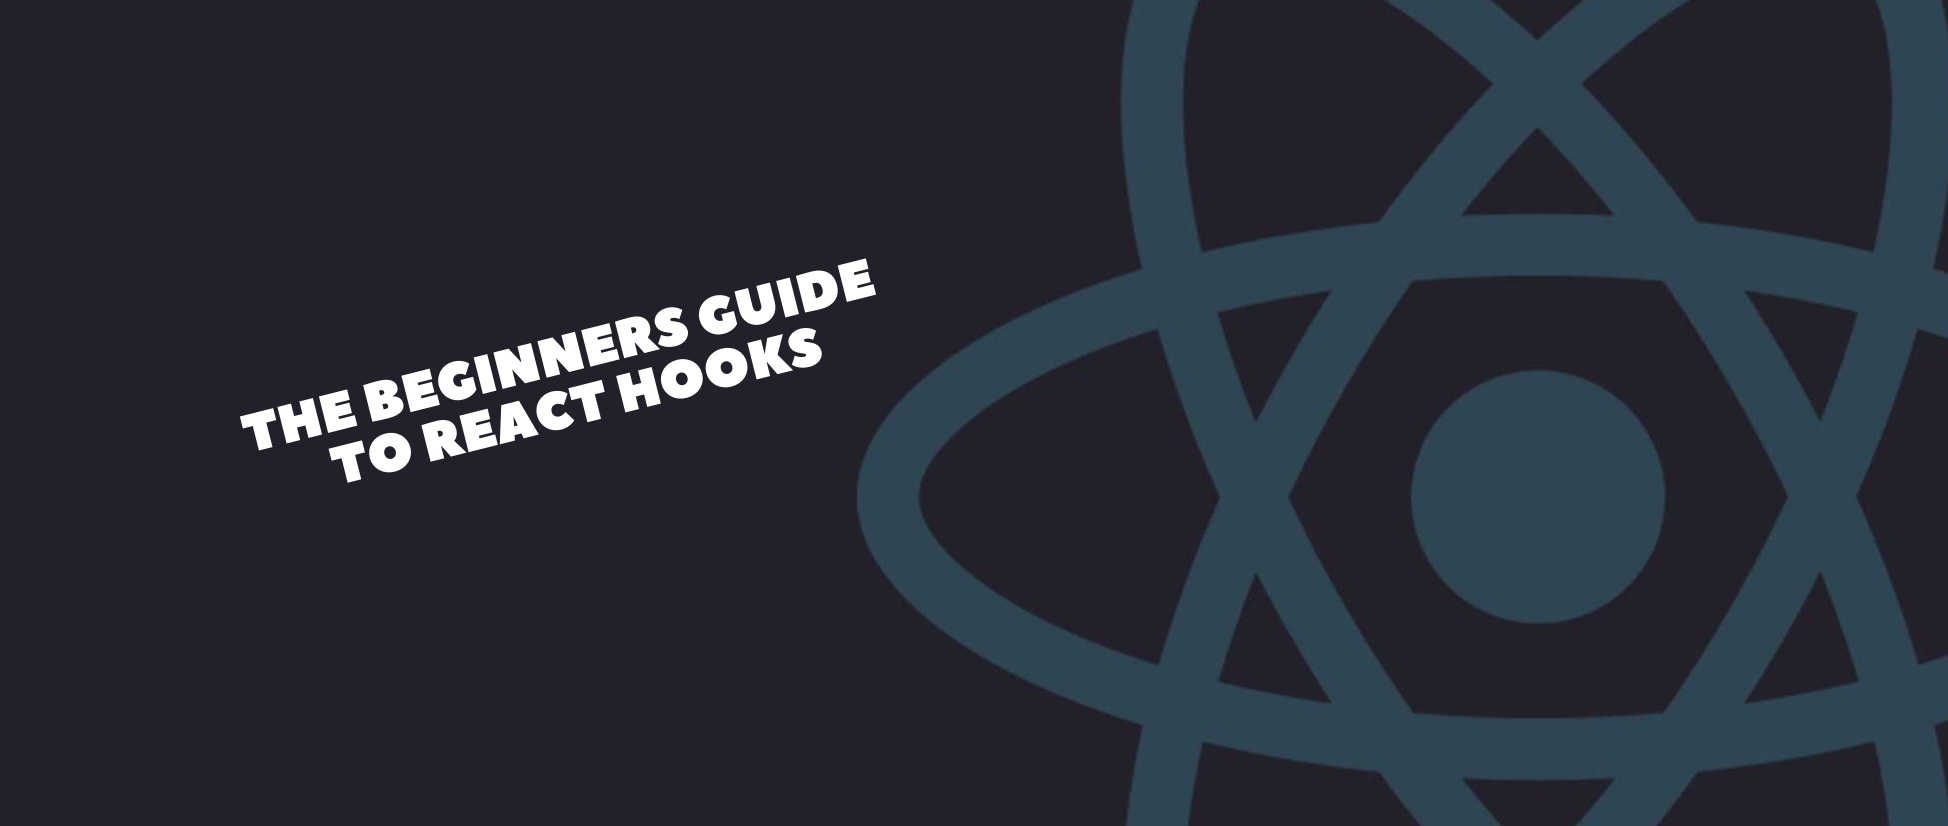 React Hooks for Beginners - A Brain-Friendly Guide on useState and useEffect